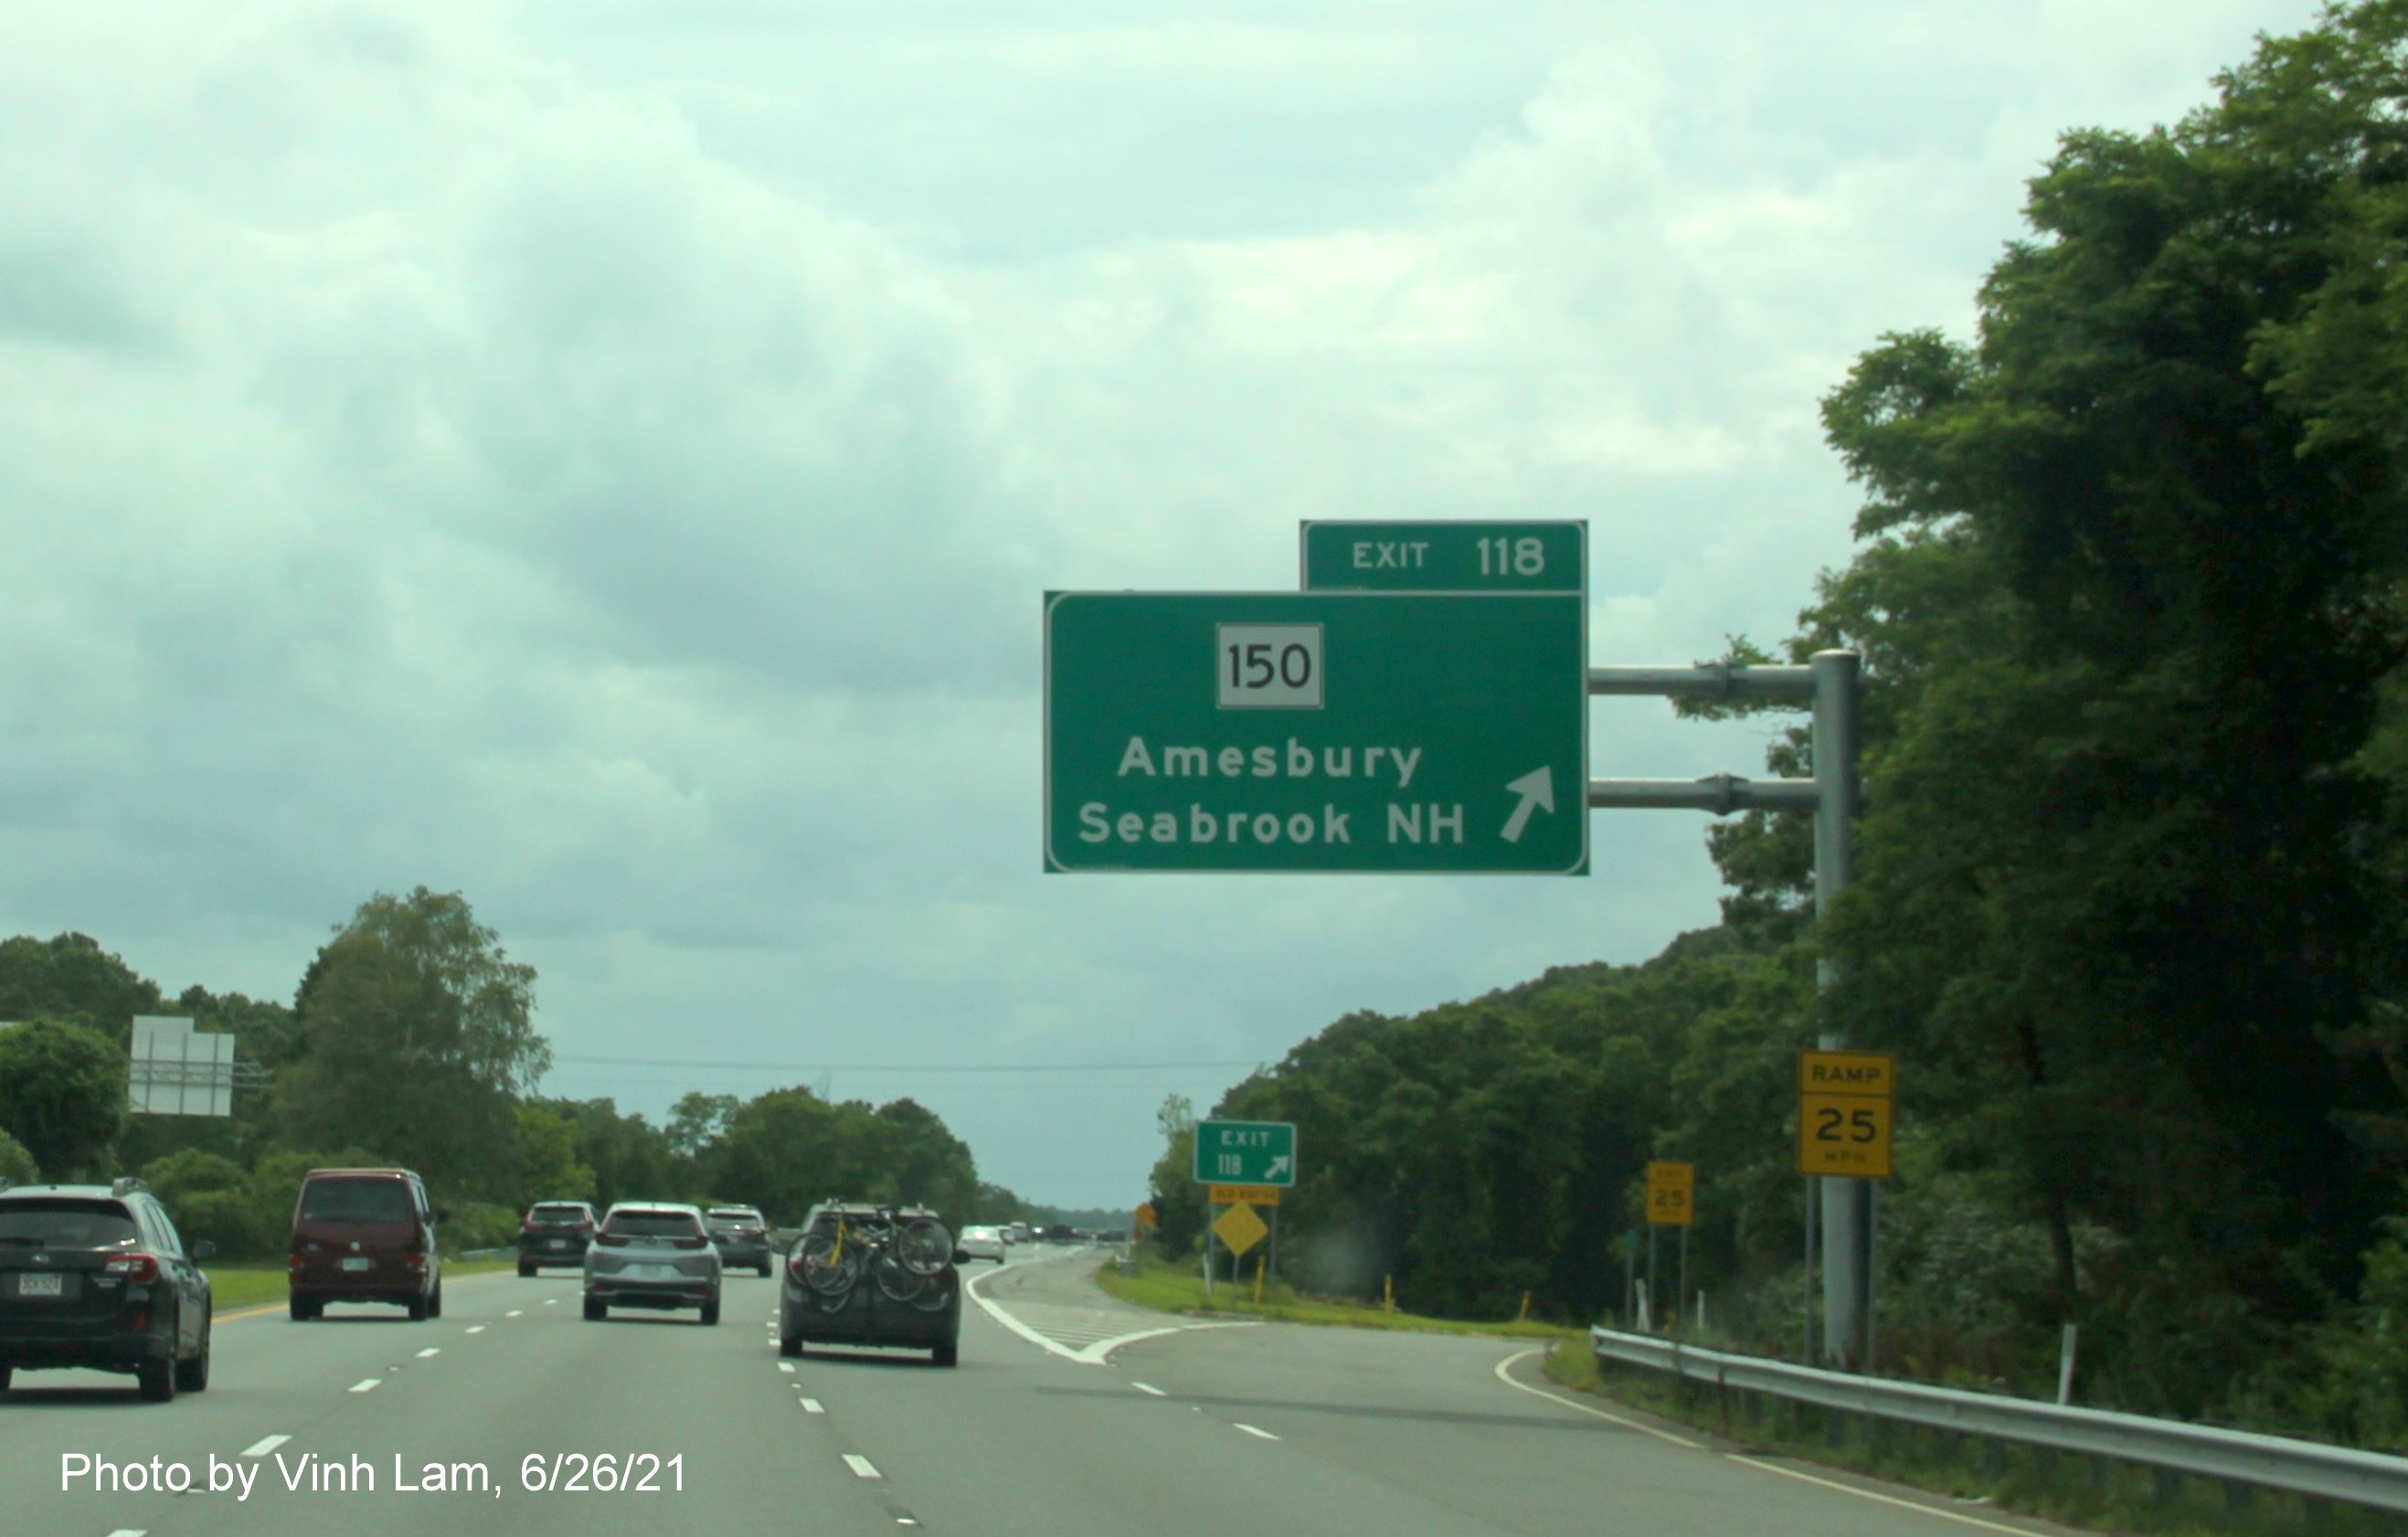 Image of overhead ramp sign for MA 150 exit with new milepost based exit number on I-495 South in Amesbury, photo bt Vinh Lam, June 2021